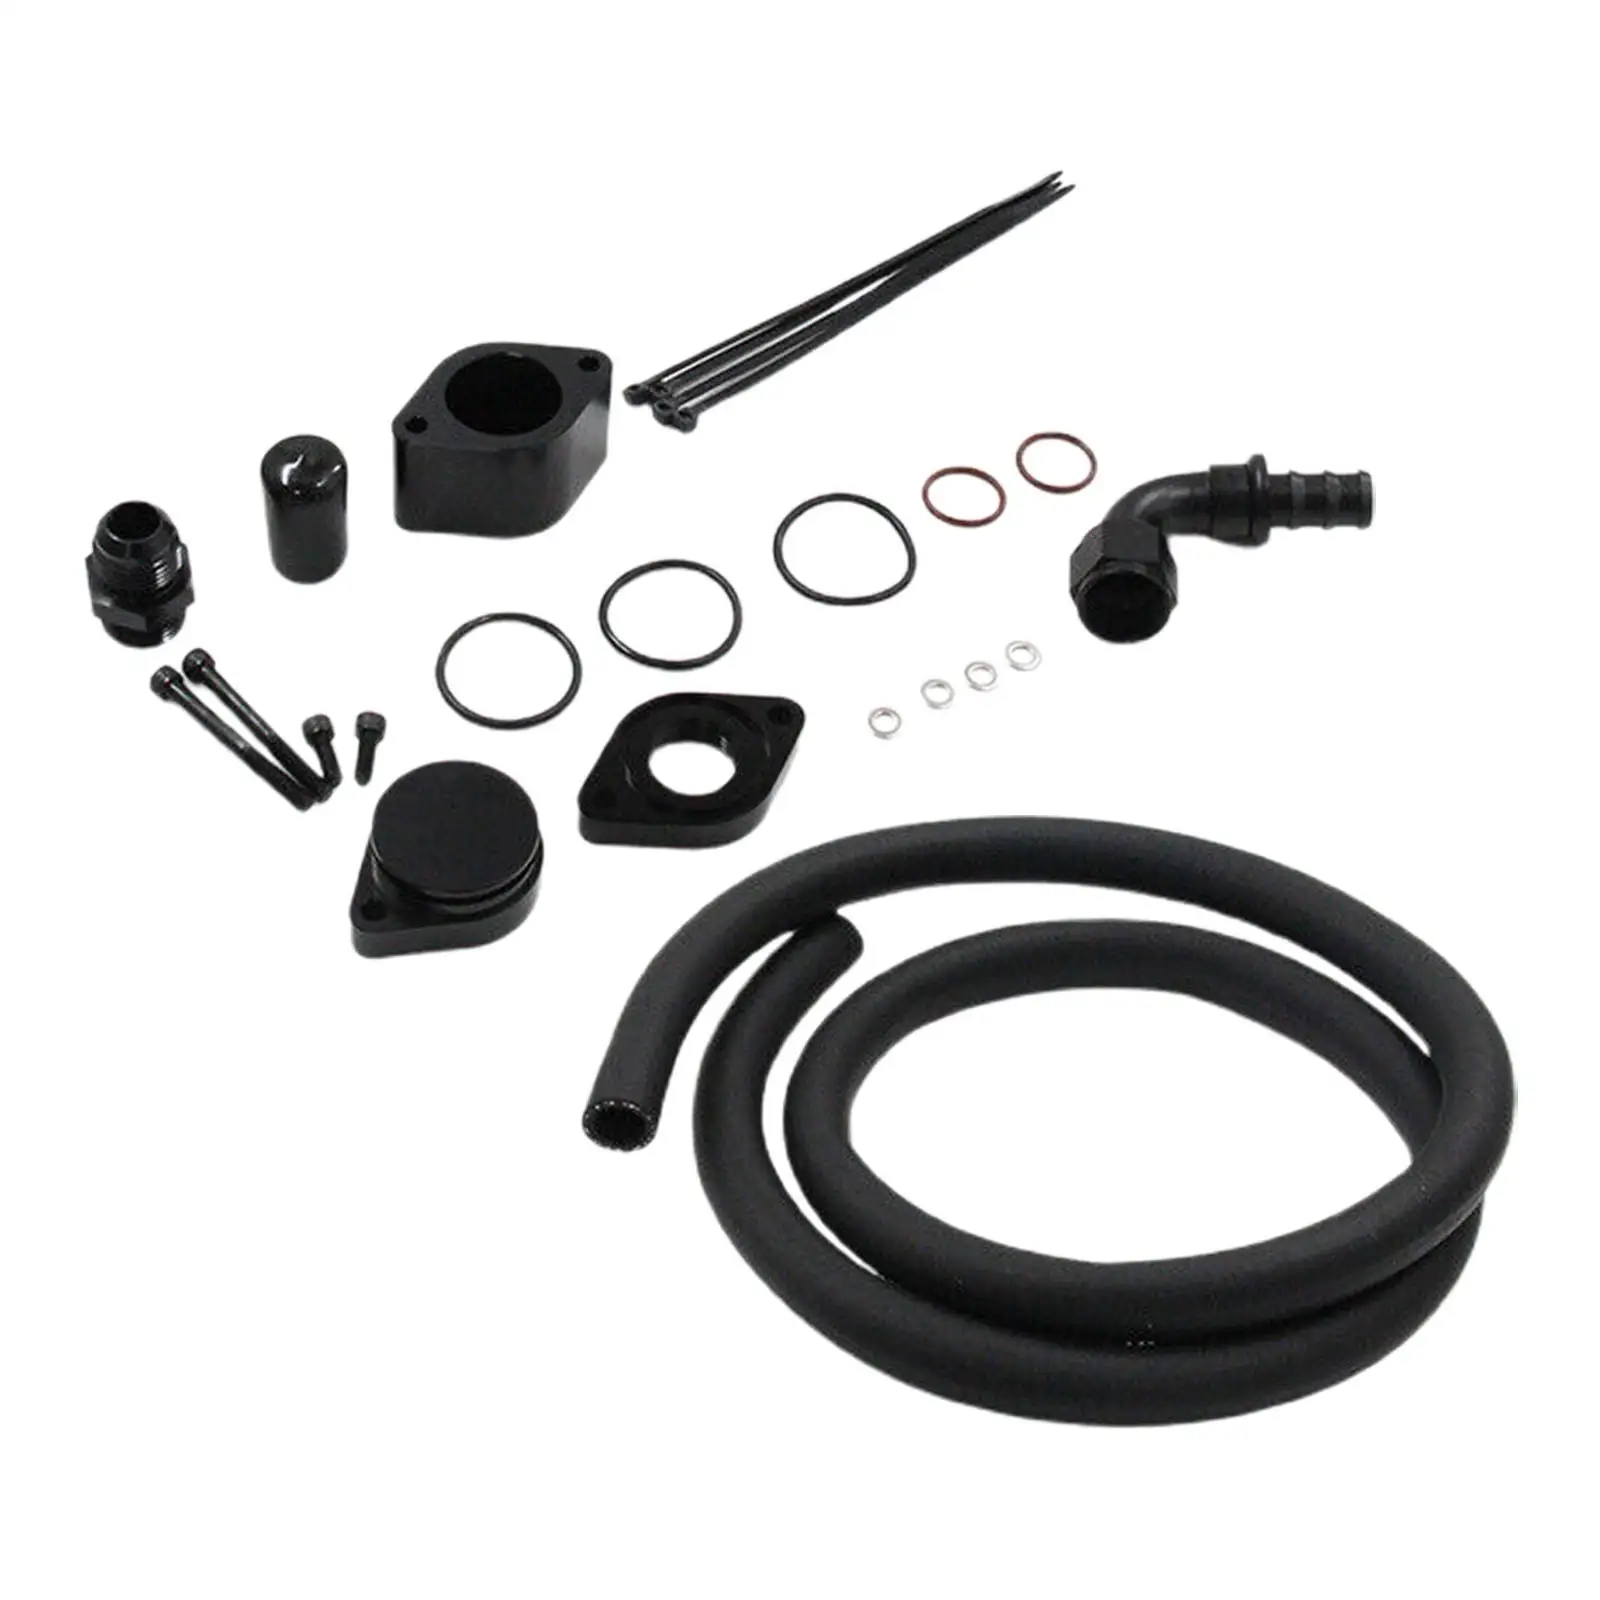 Ccv Pcv Reroute Engine Ventilation Kit Directly Replace for Ford Super Duty 11-20 6.7L Powerstroke F-350 F-450 F-250 F750